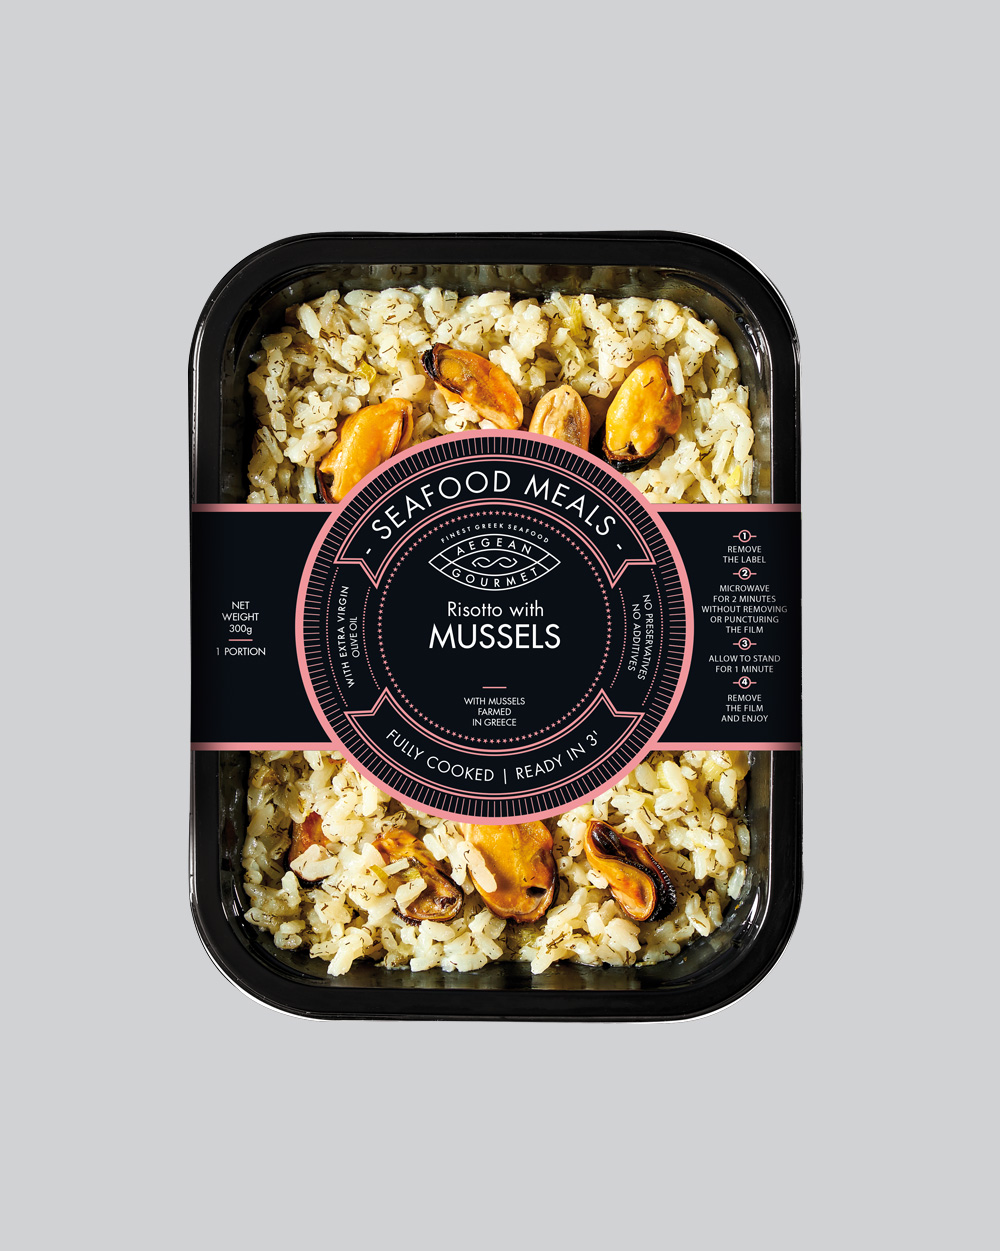 Seafood Meal product into packaging, Risotto with mussels & clams